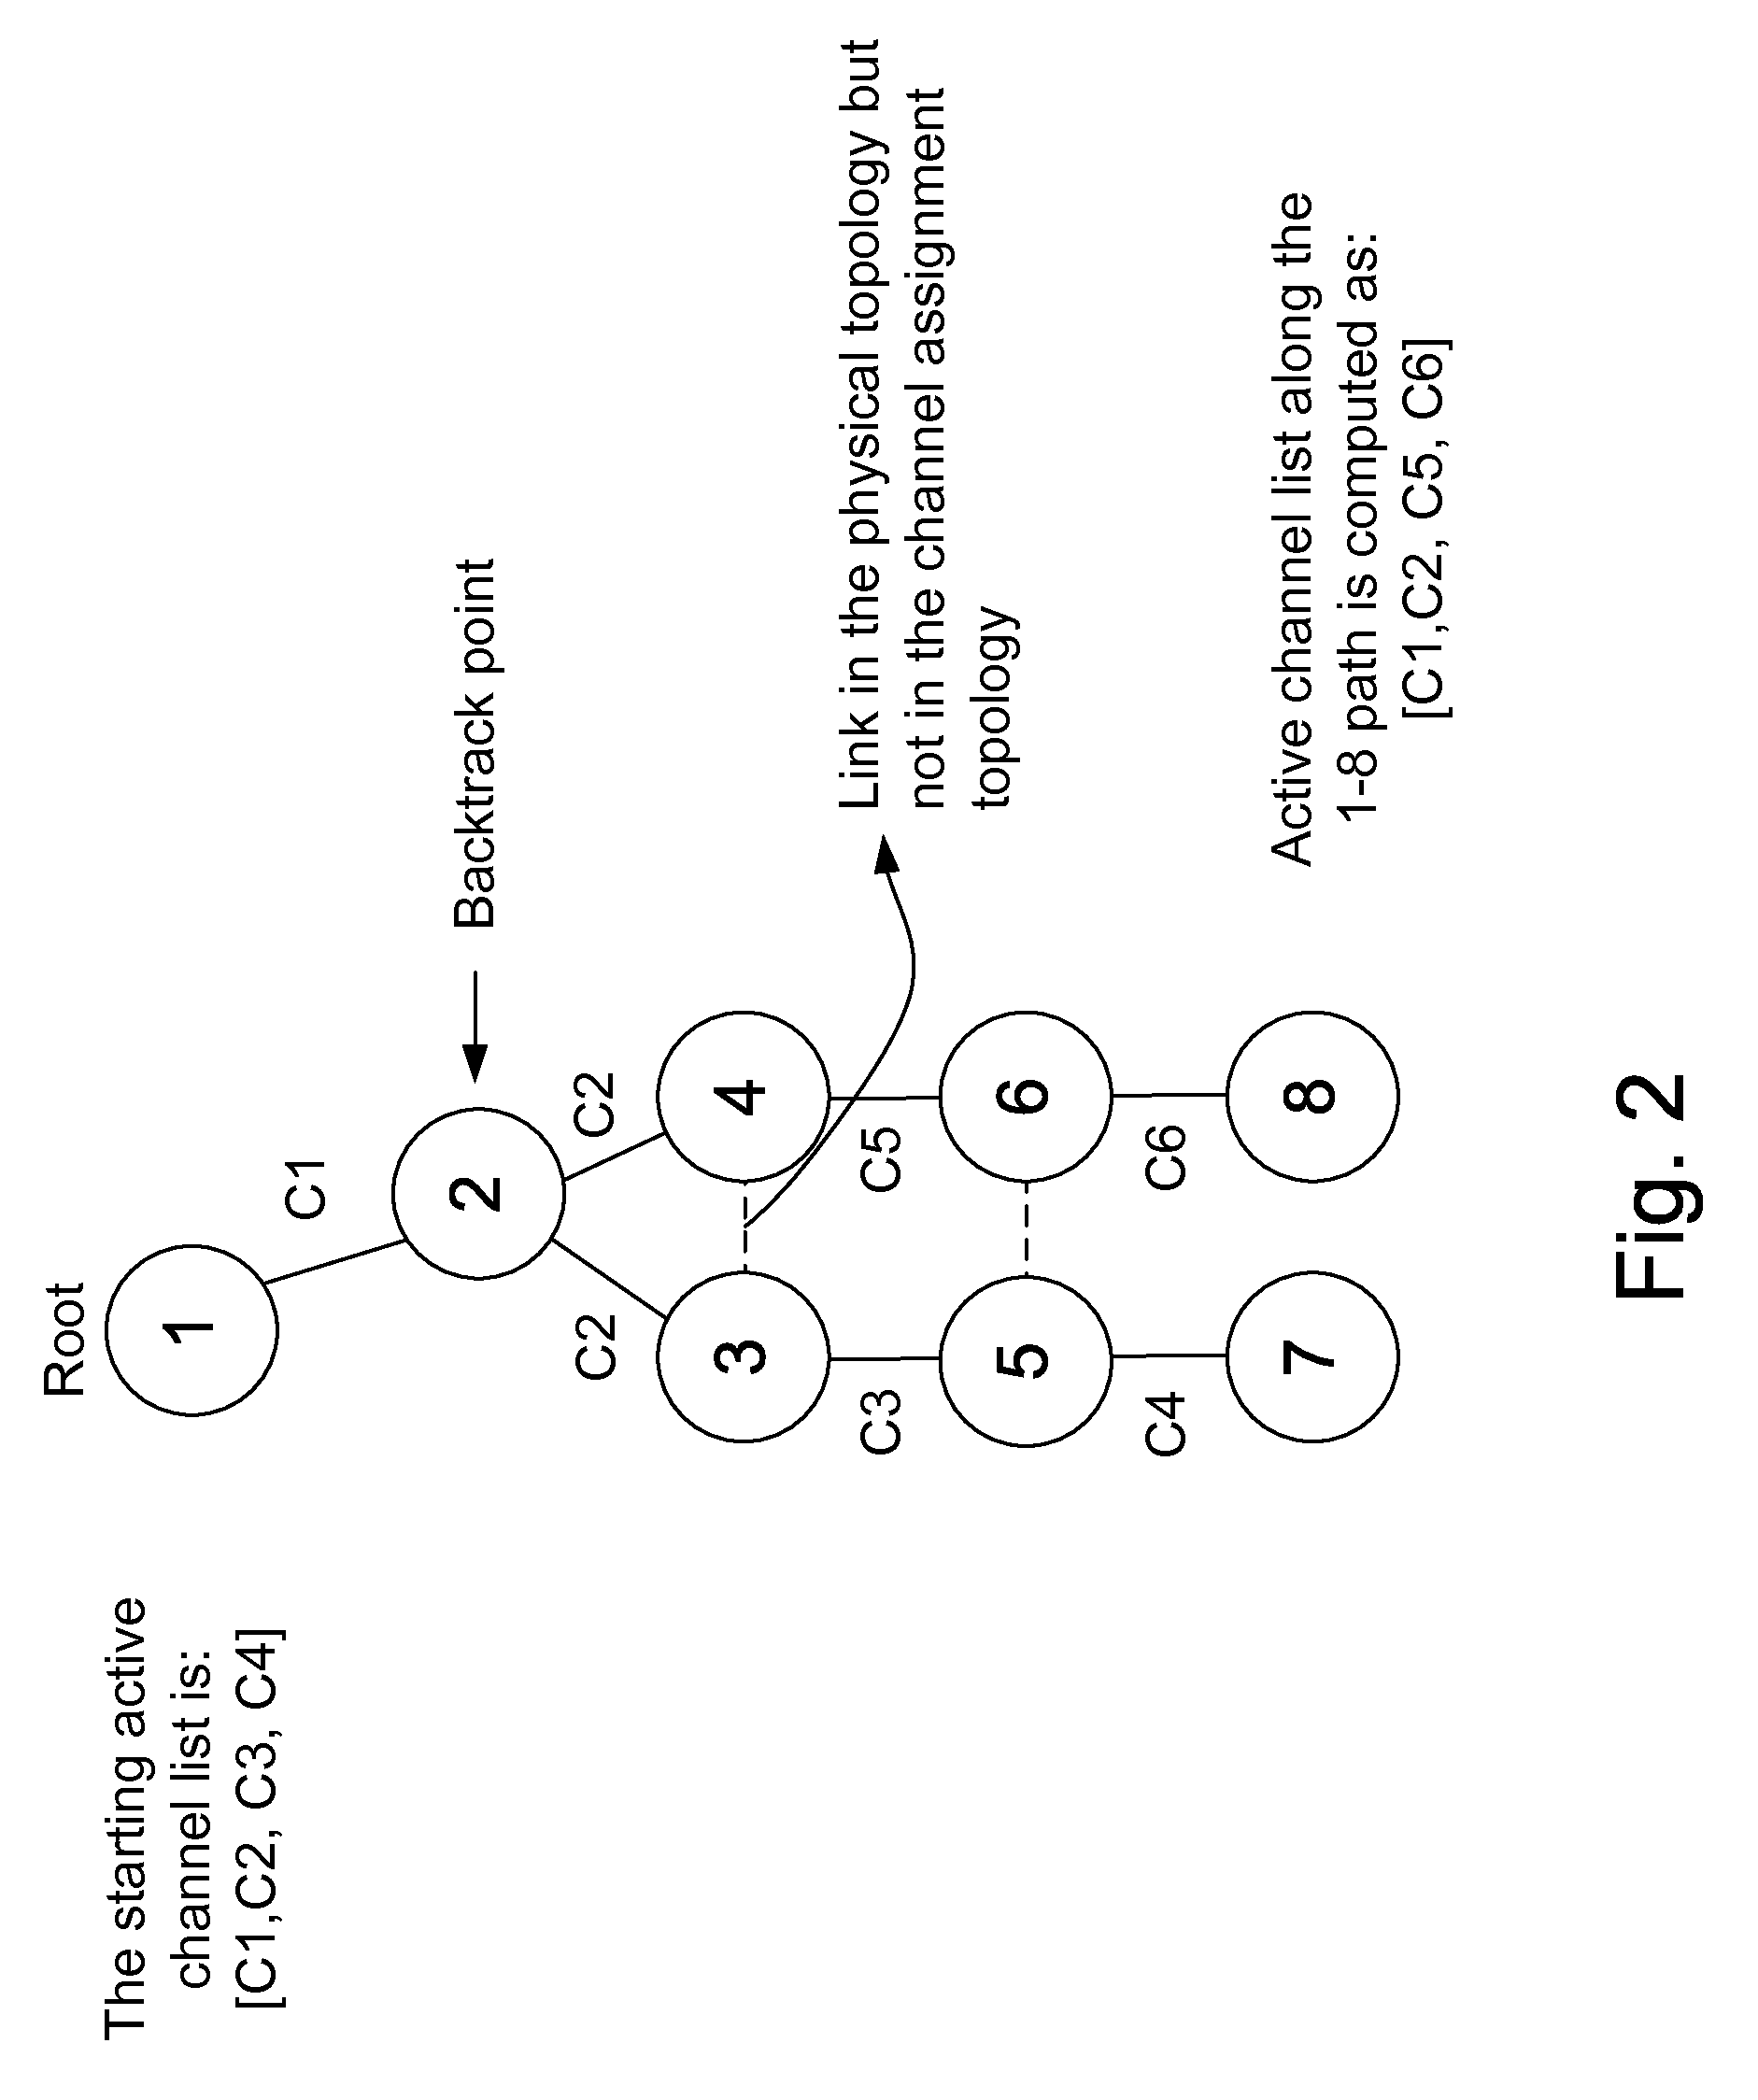 Multi-channel assignment method for multi-radio multi-hop wireless mesh networks